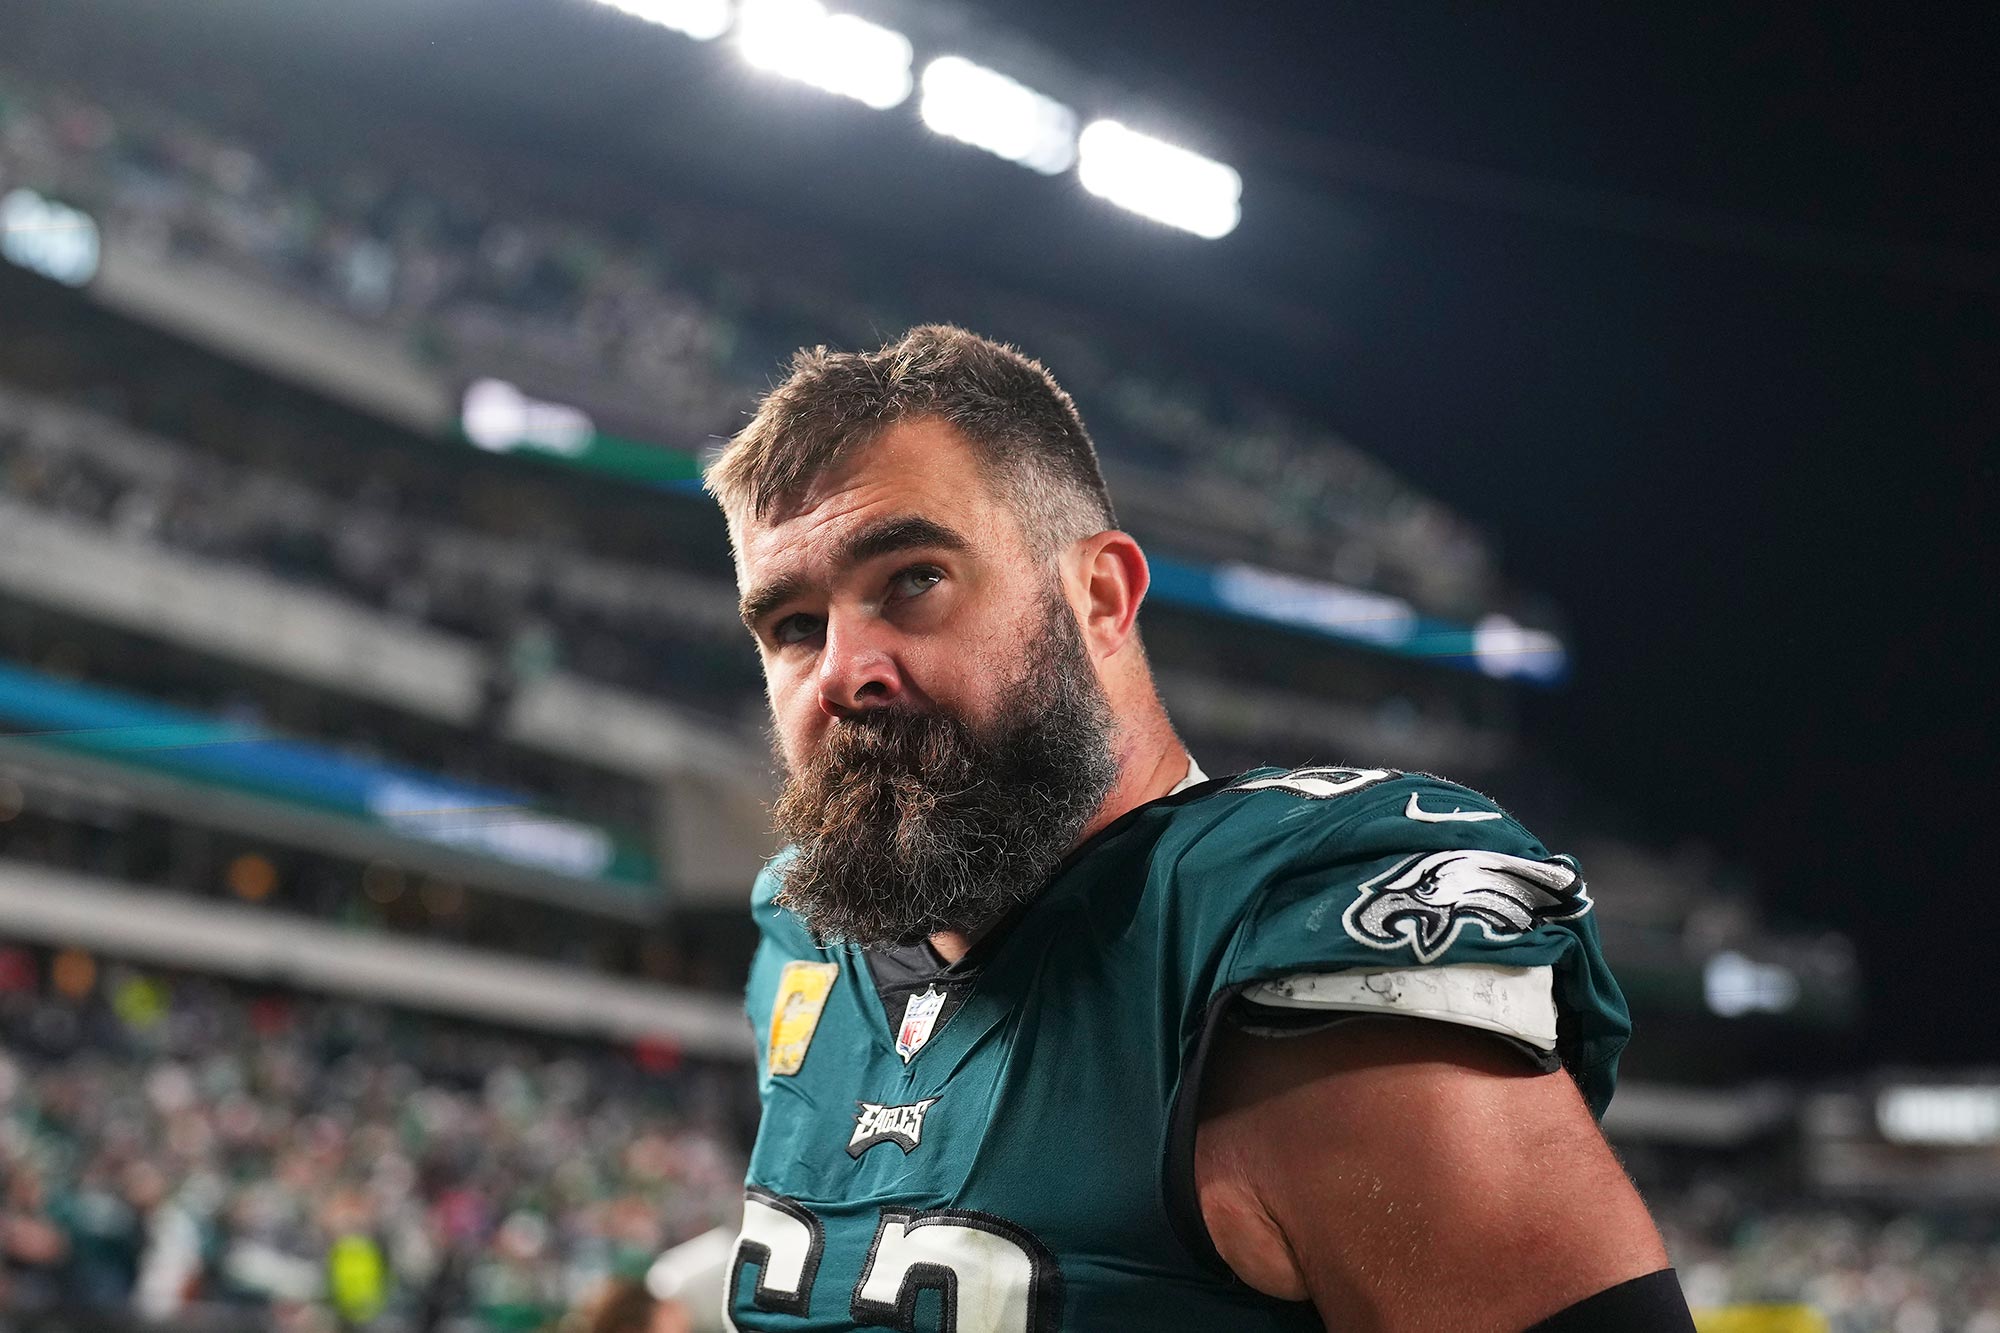 The ideal male body  with an incredible mane of hair. H/t @jason.kelce